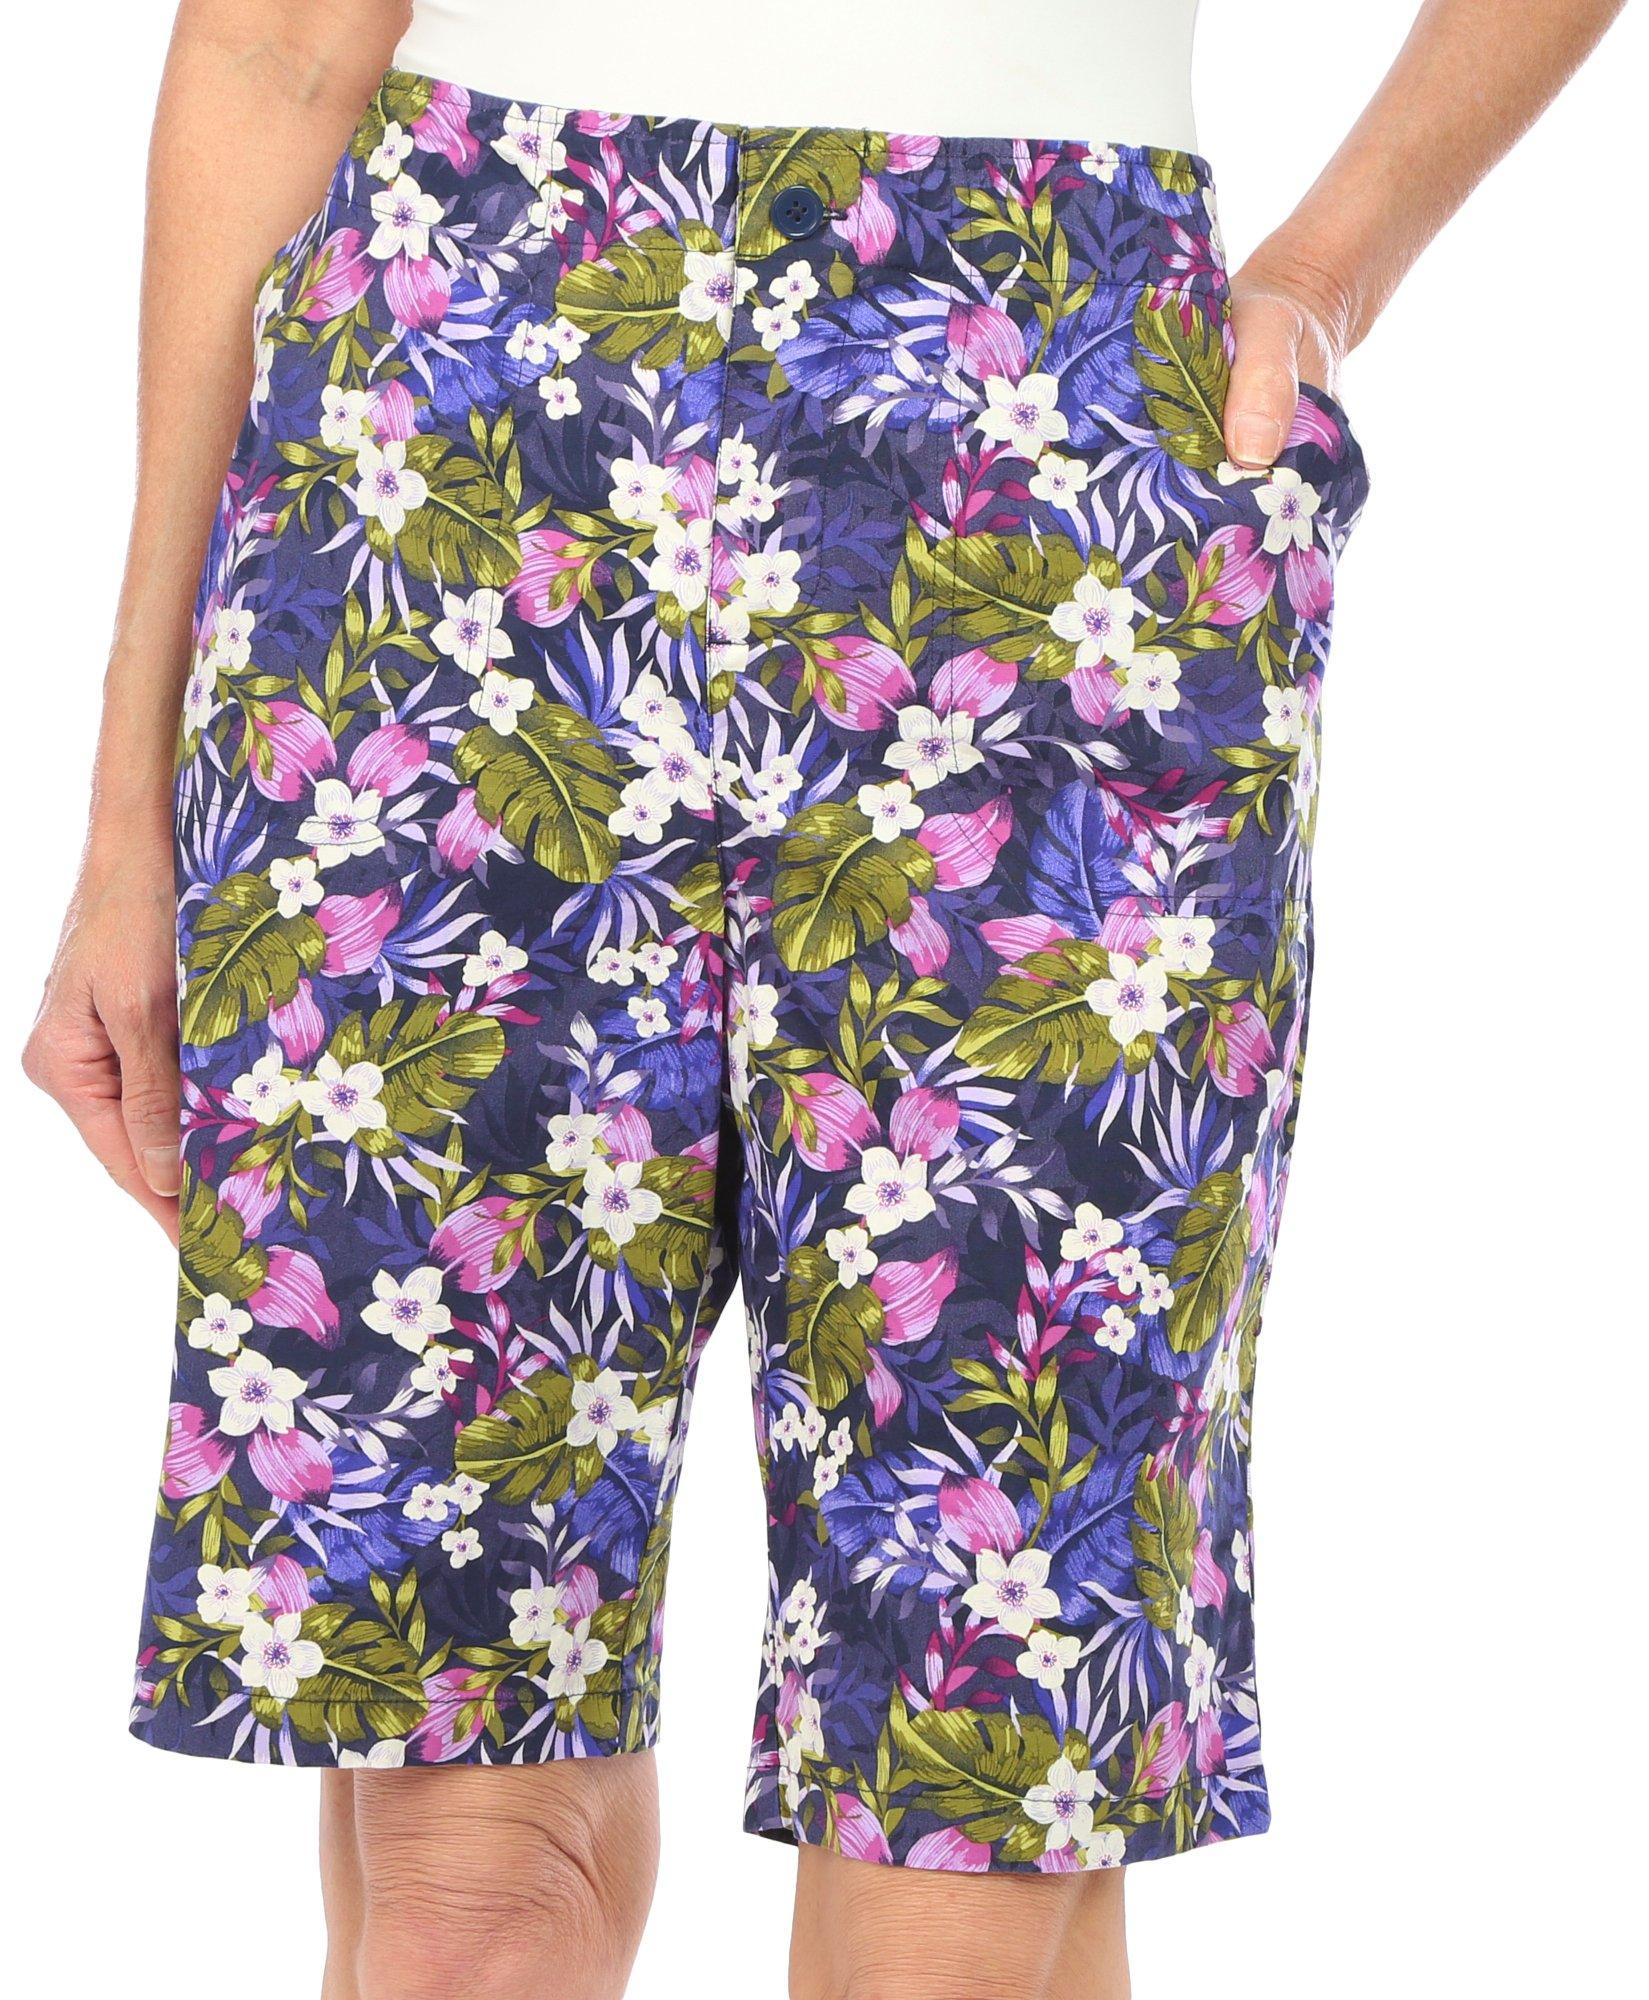 Womens 11 in. Floral Bermuda Shorts